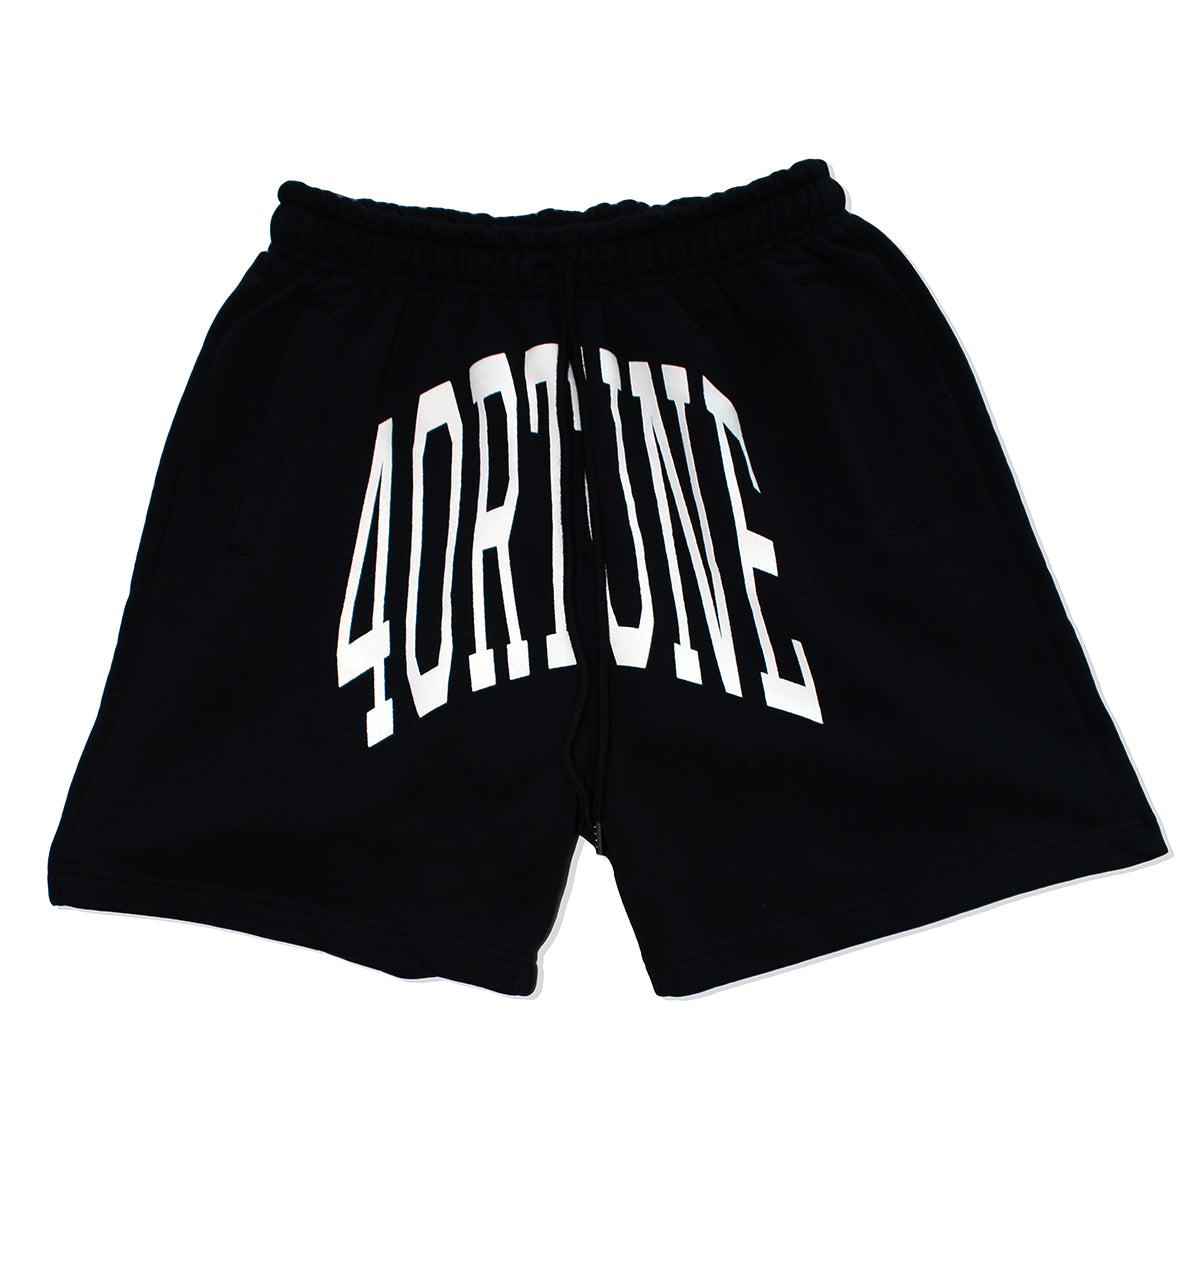 4ortune Arch Shorts